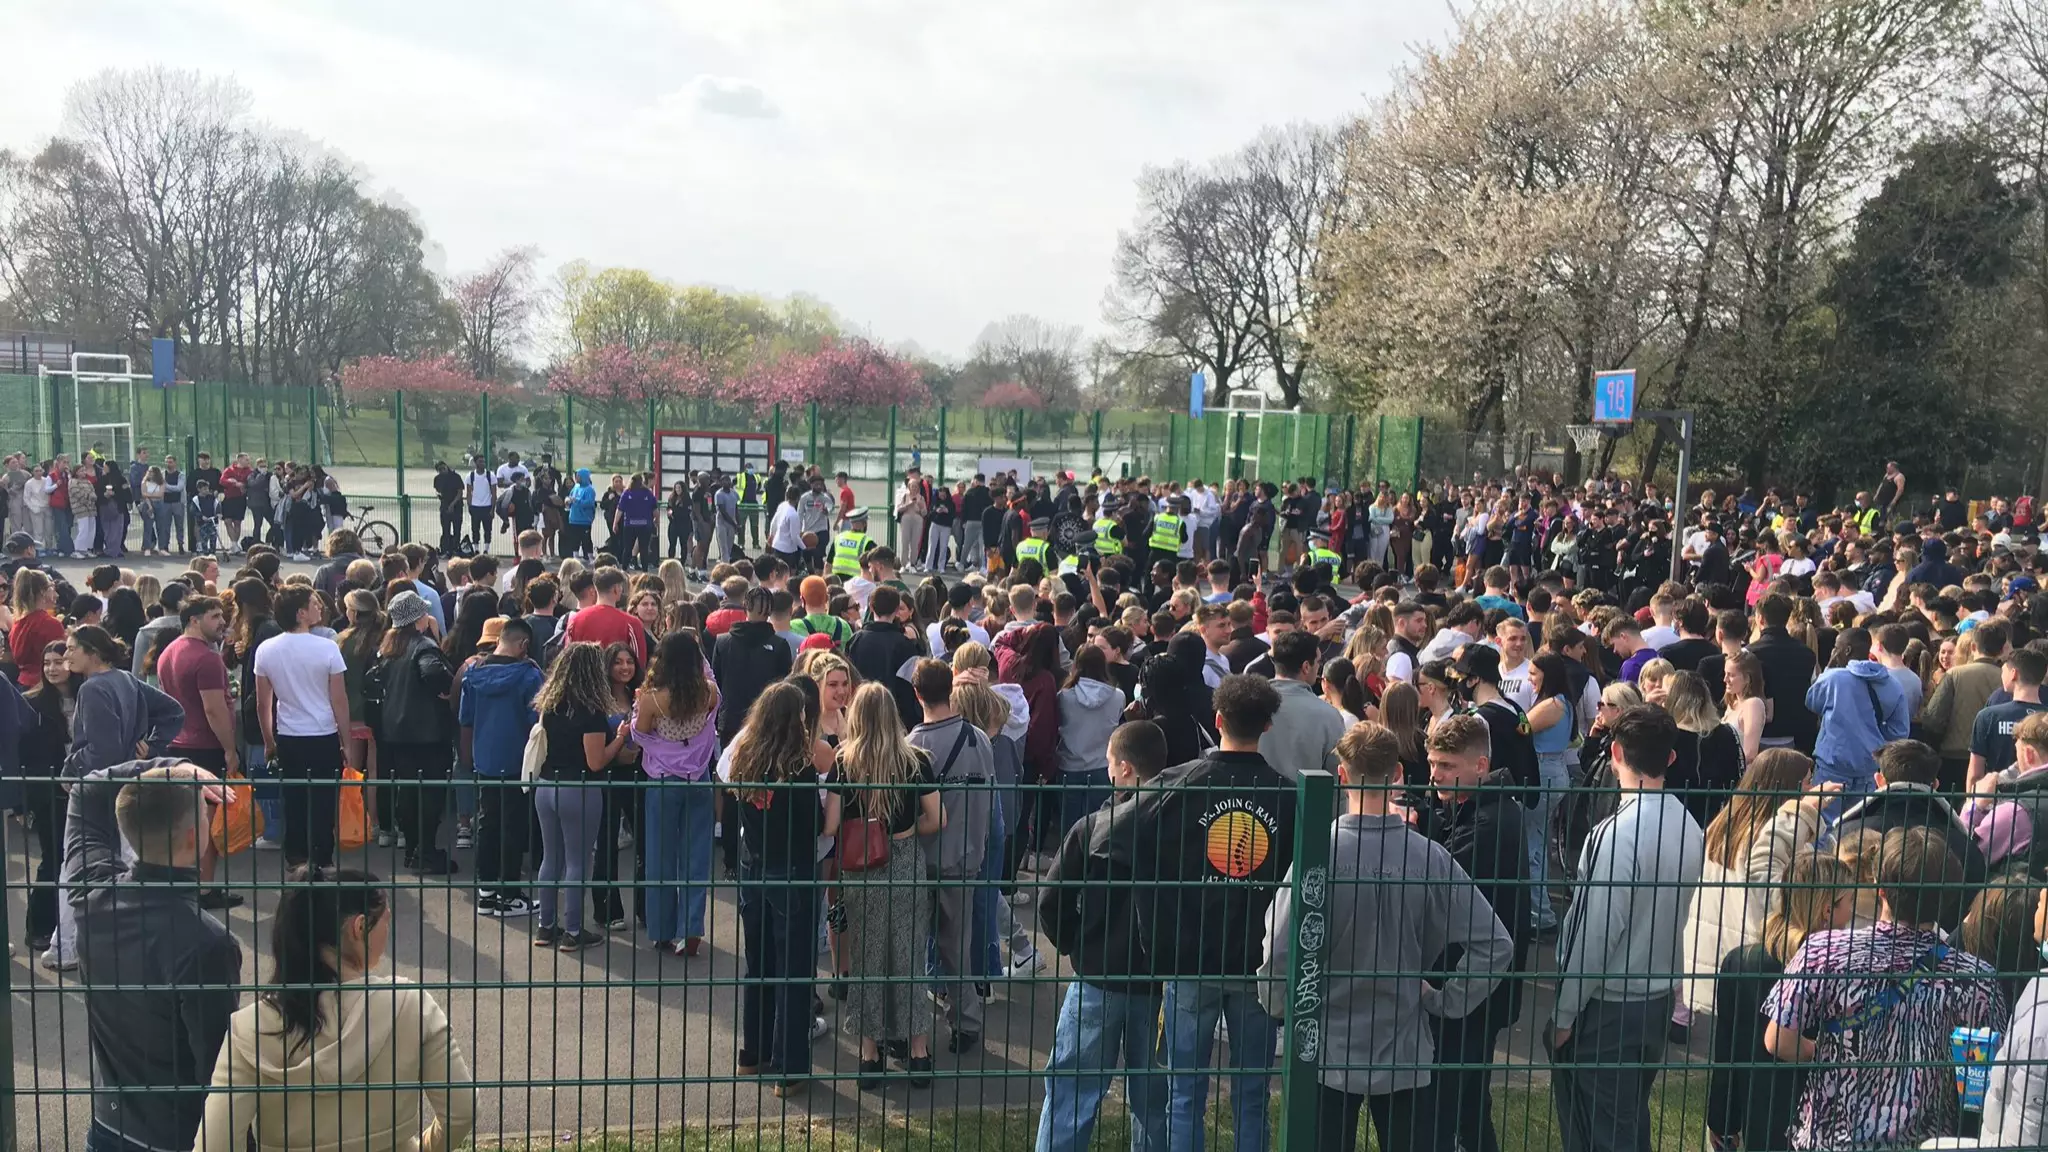 ​Hundreds Gather As AJ Tracey Announces 'Surprise Gig' At Park Sparking Huge Police Attendance